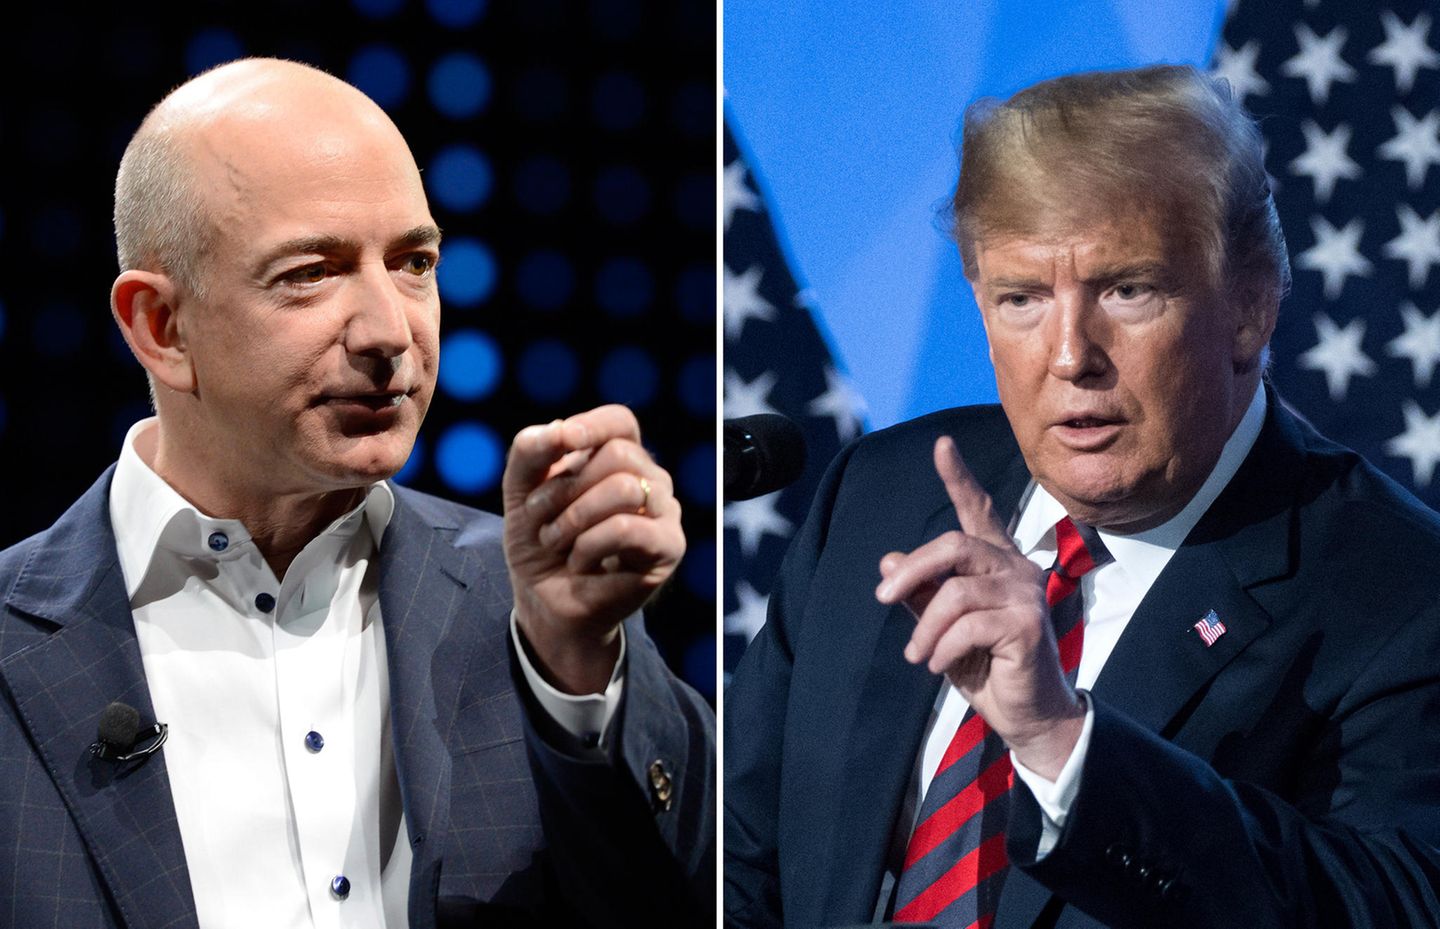 The most powerful and the richest man in the world: Donald Trump and Jeff Bezos can not really suffer each other